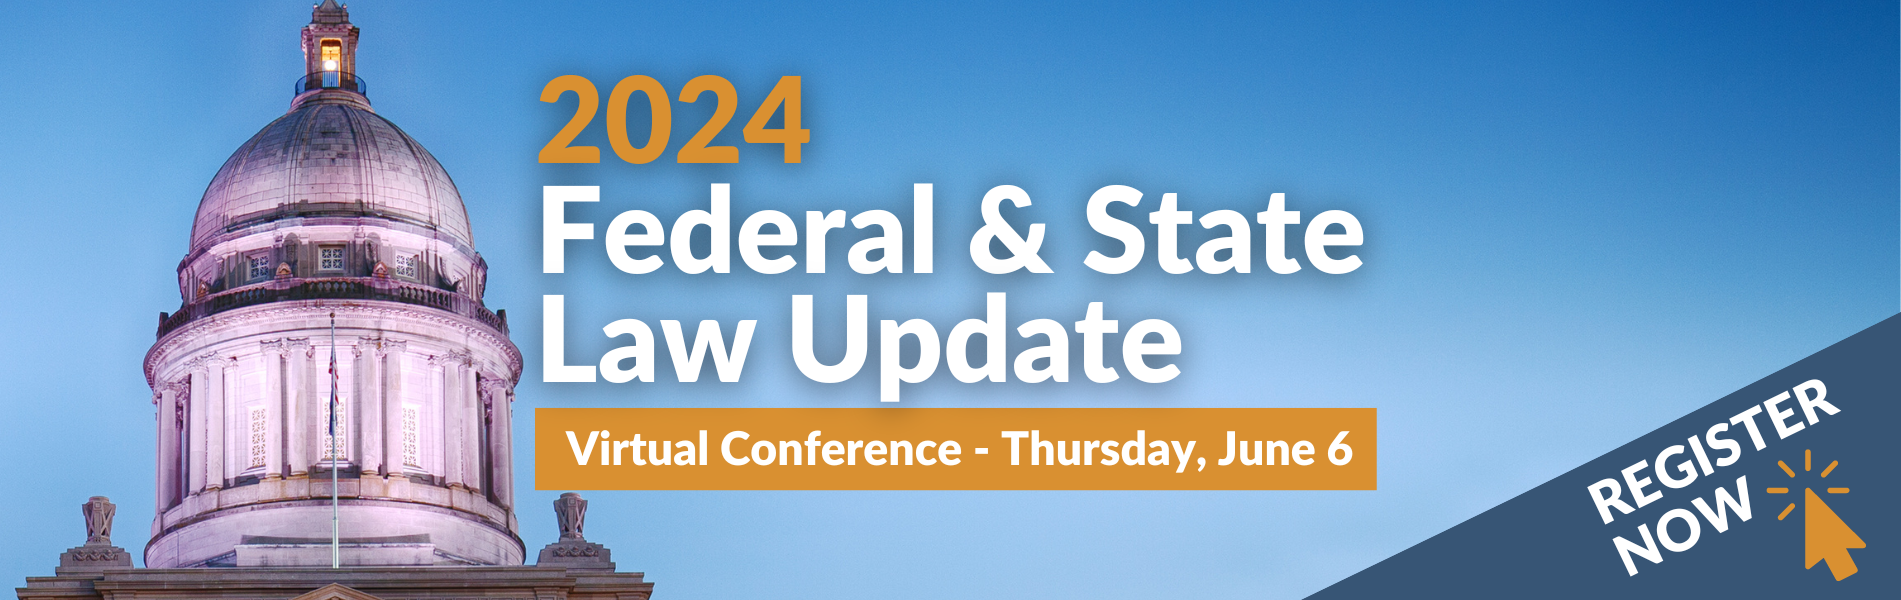 2024 Federal and State Law Update virtual conference June 6